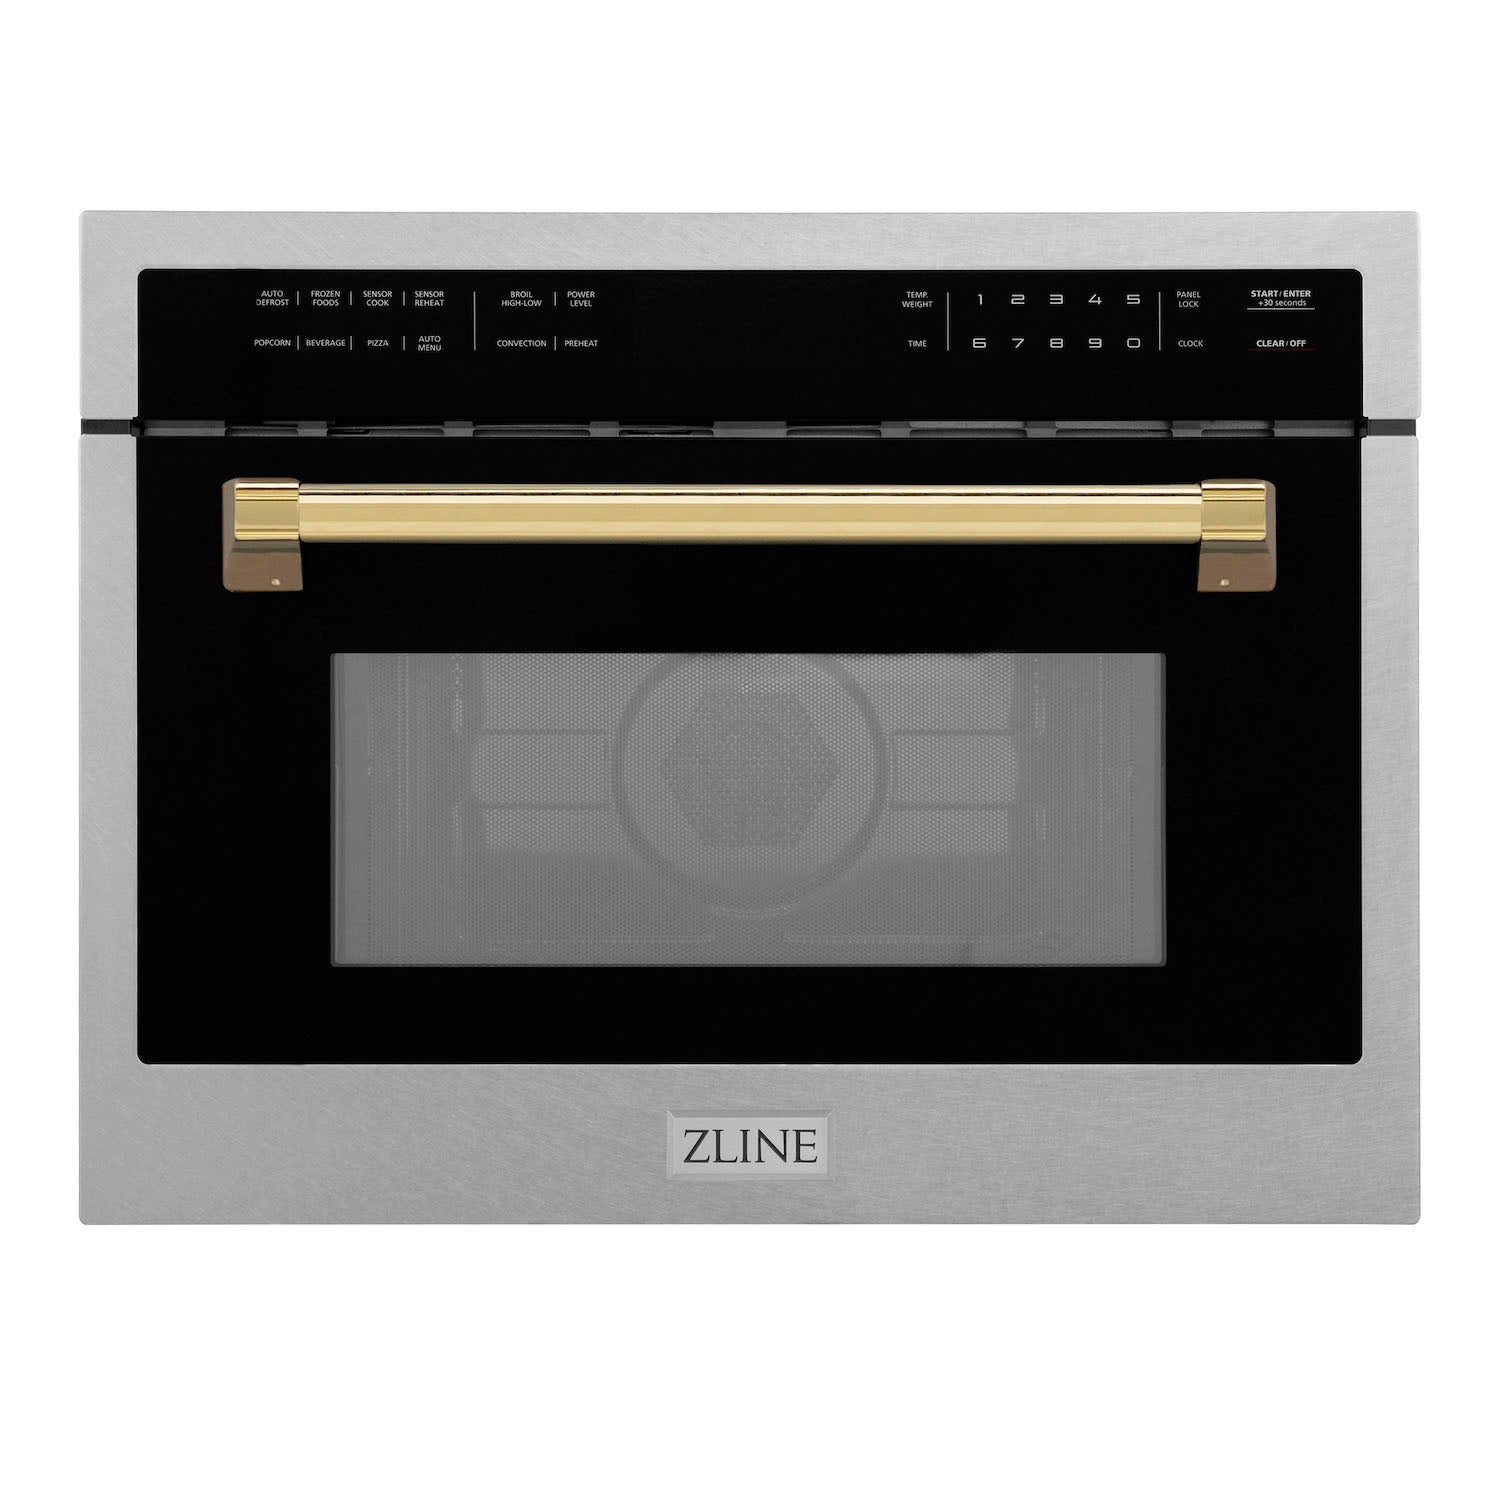 ZLINE Autograph Edition 24 in. 1.6 cu ft. Built-in Convection Microwave Oven in DuraSnow Stainless Steel with Polished Gold Accents